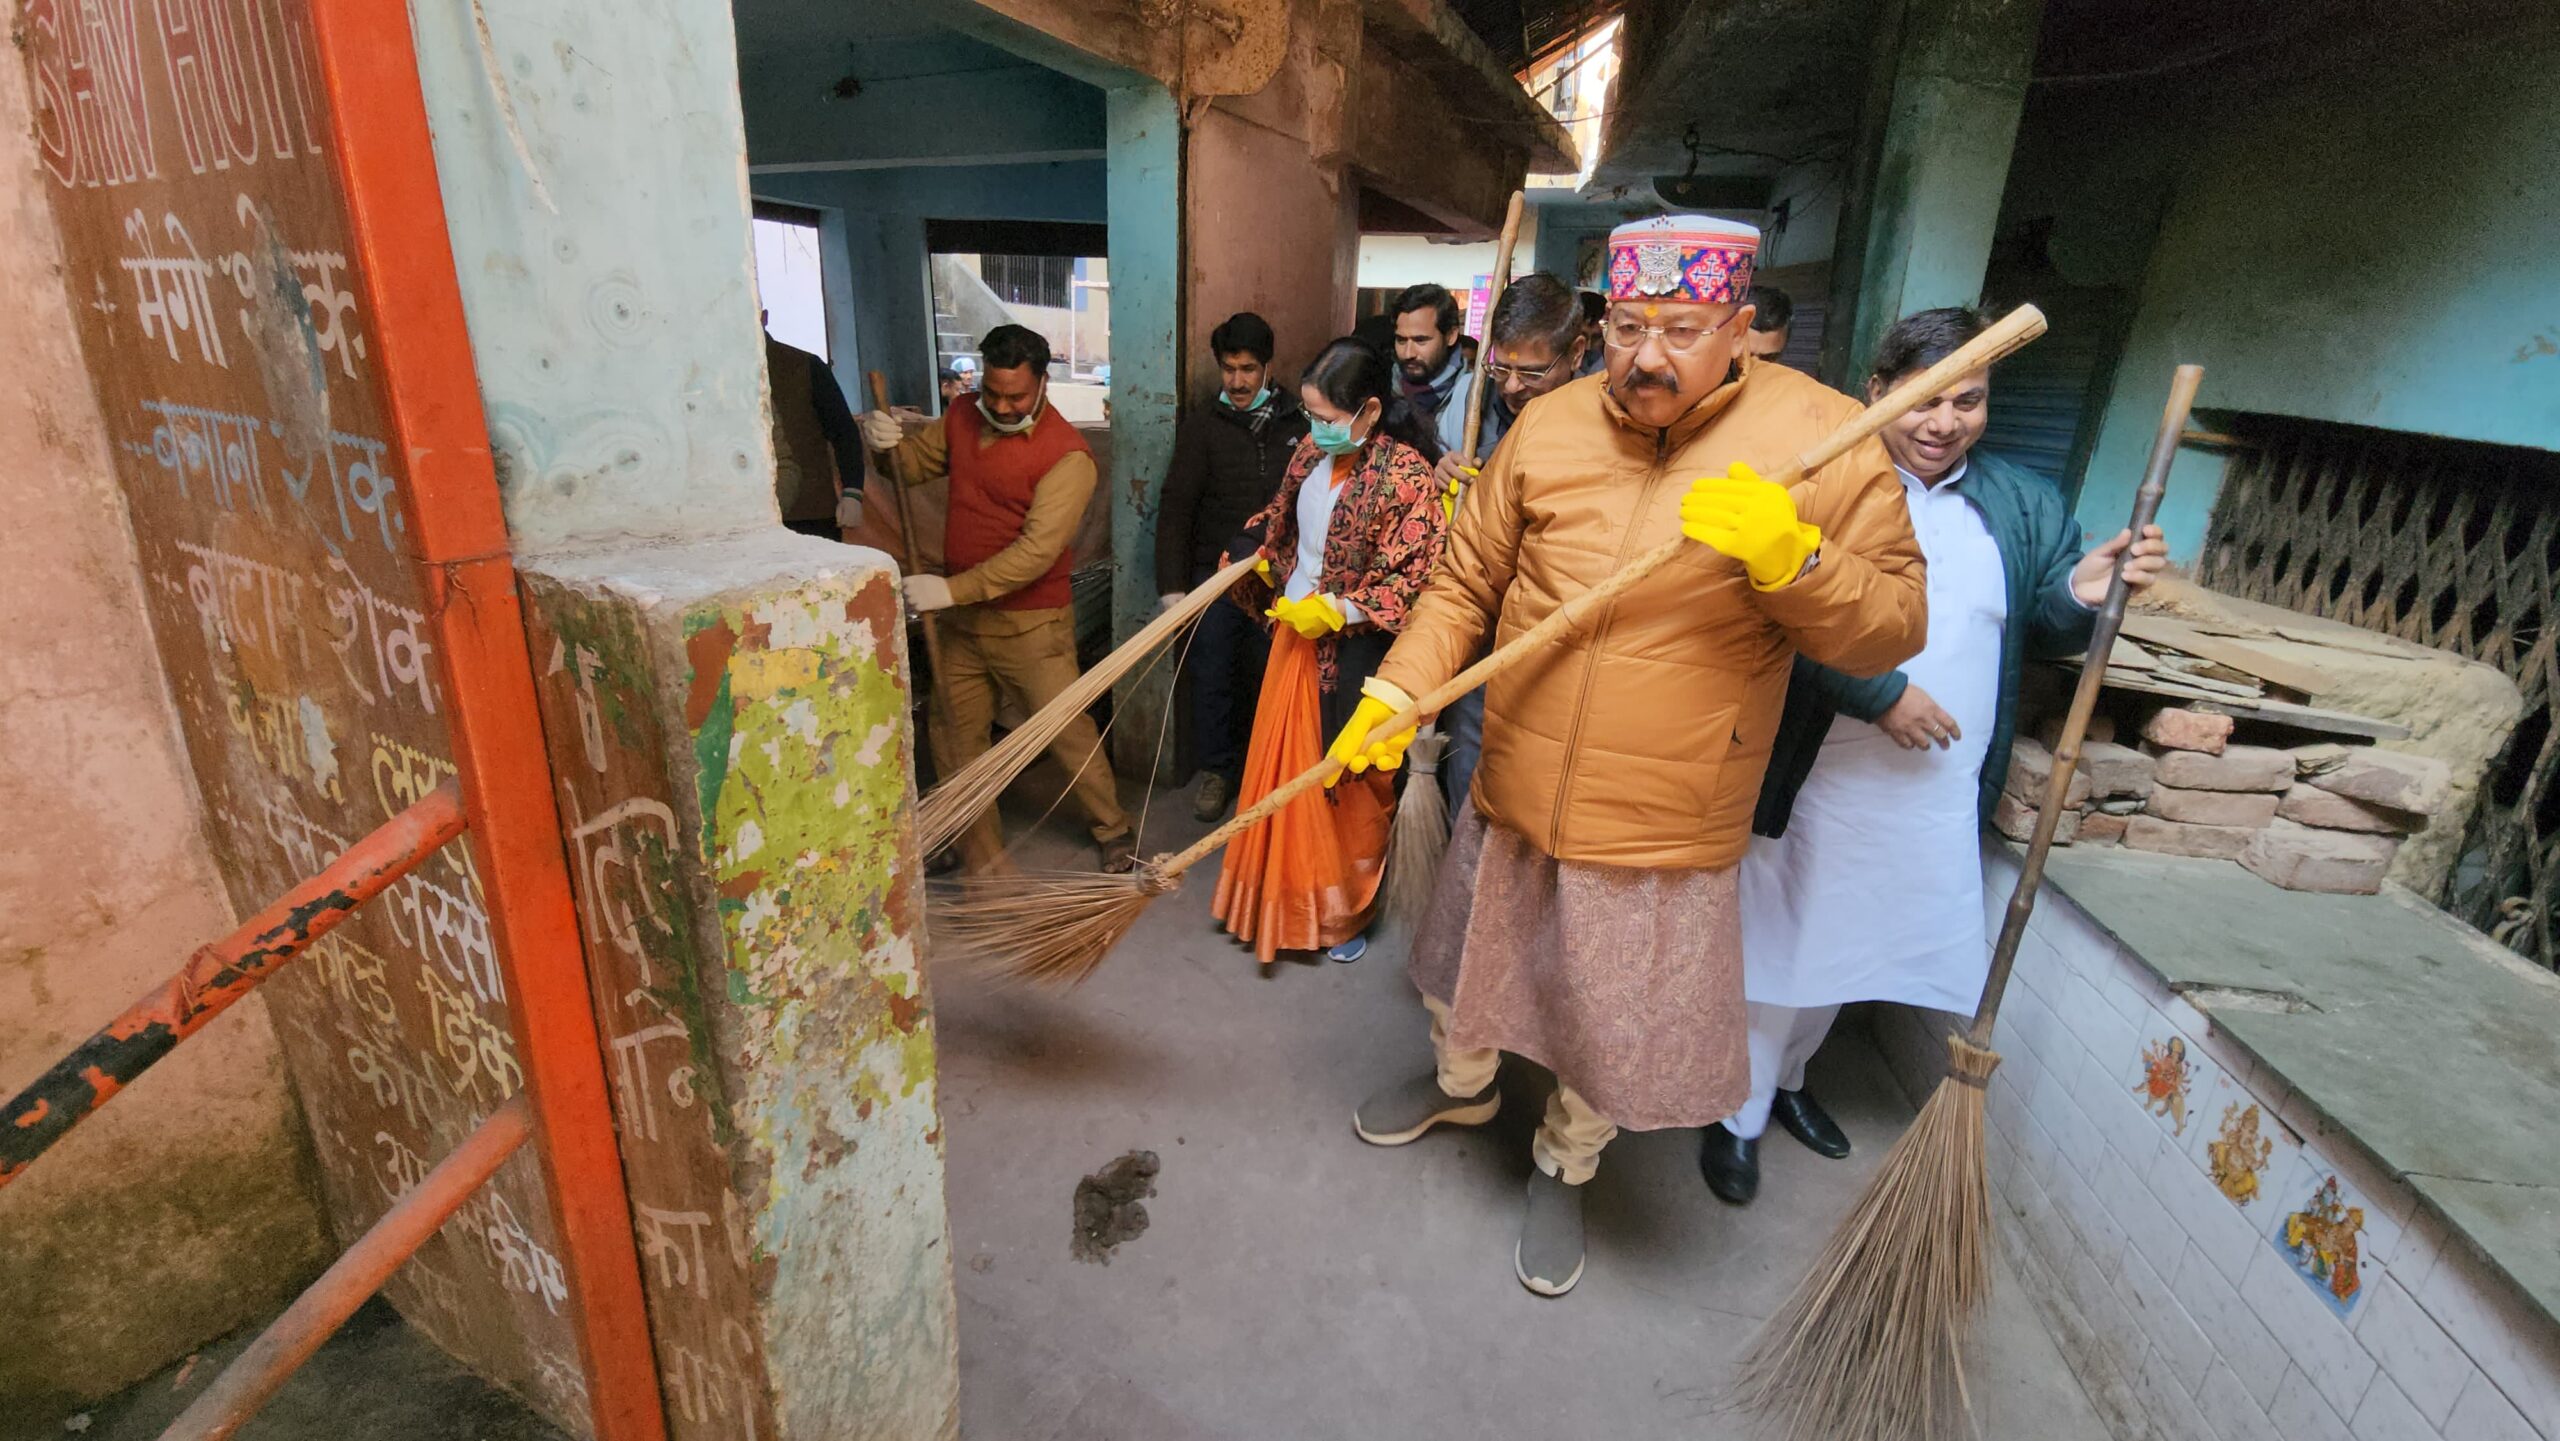 Maharaj offered prayers at Neelkanth Mahadev after participating in the cleanliness campaign.